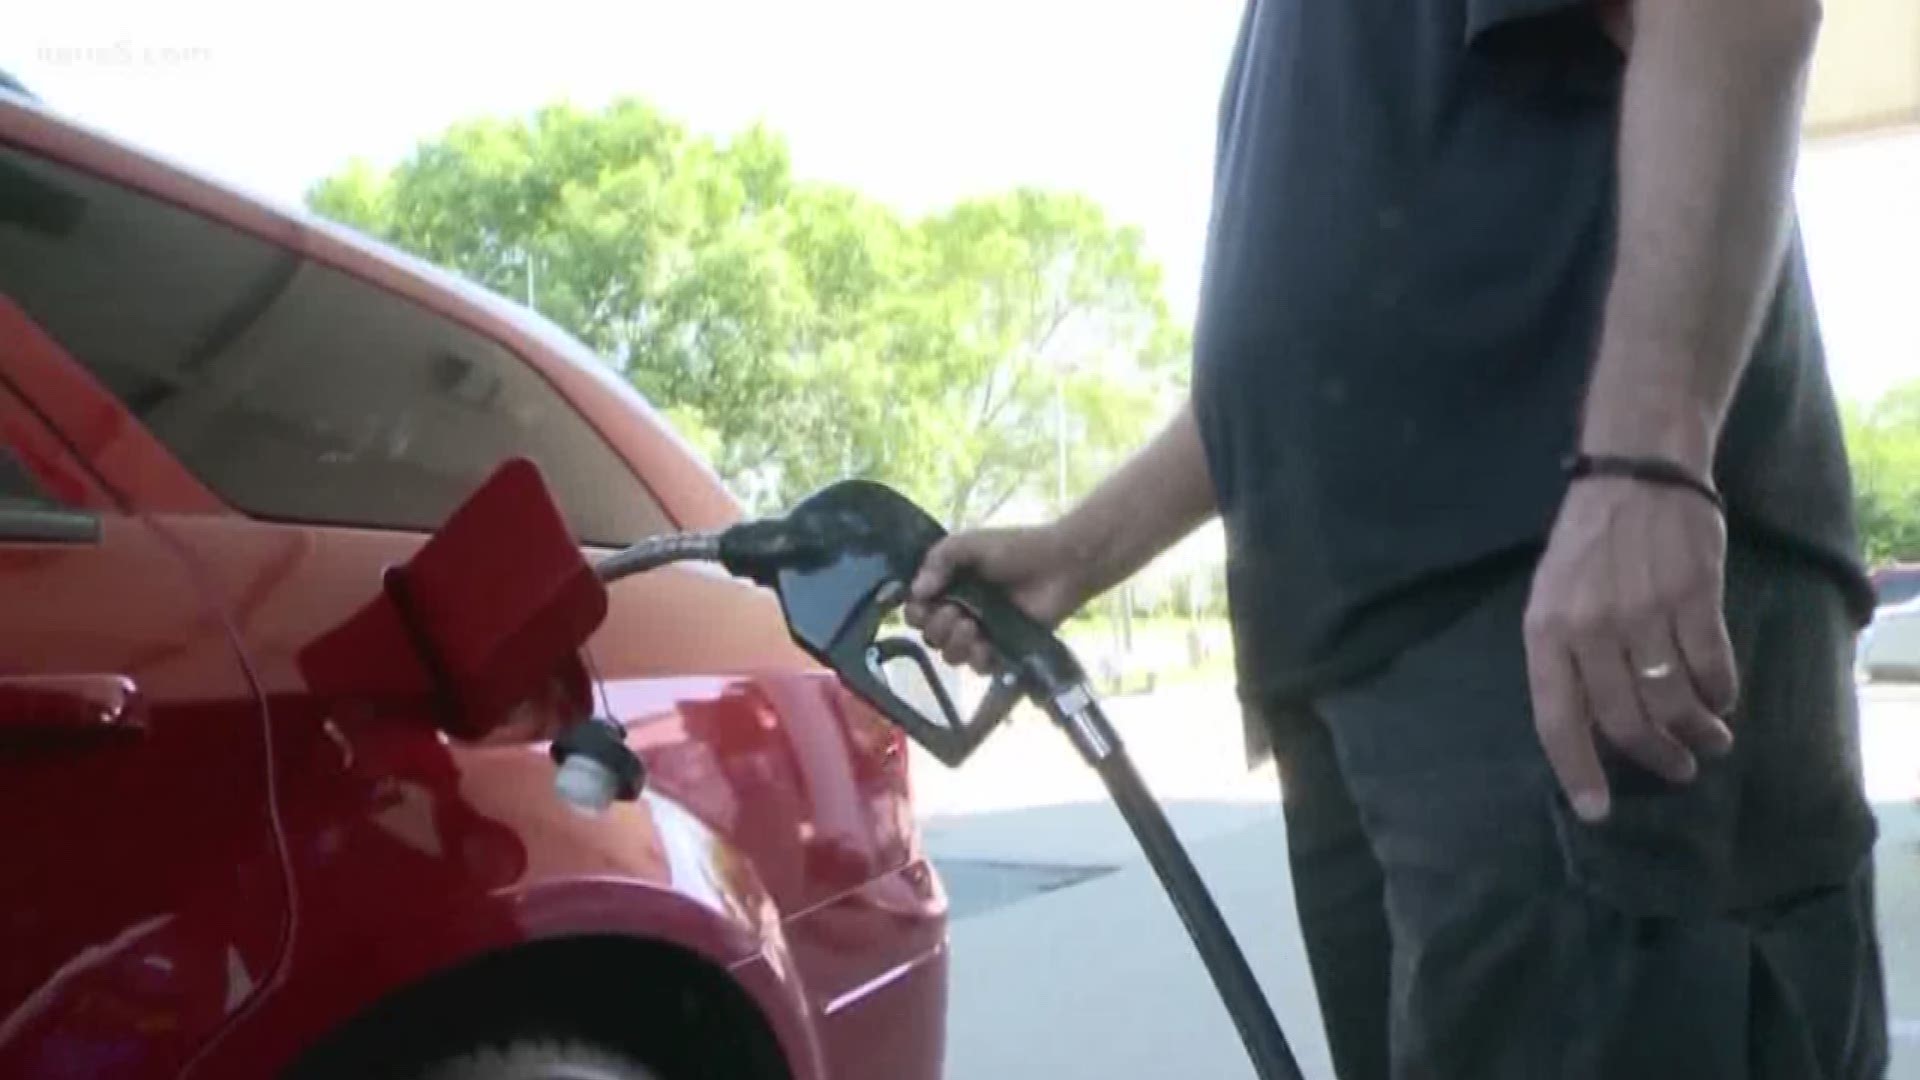 According to AAA, the average price for a gallon of unleaded gas in Texas is $2.63. That's 46 cents more per gallon compared to this day last year.